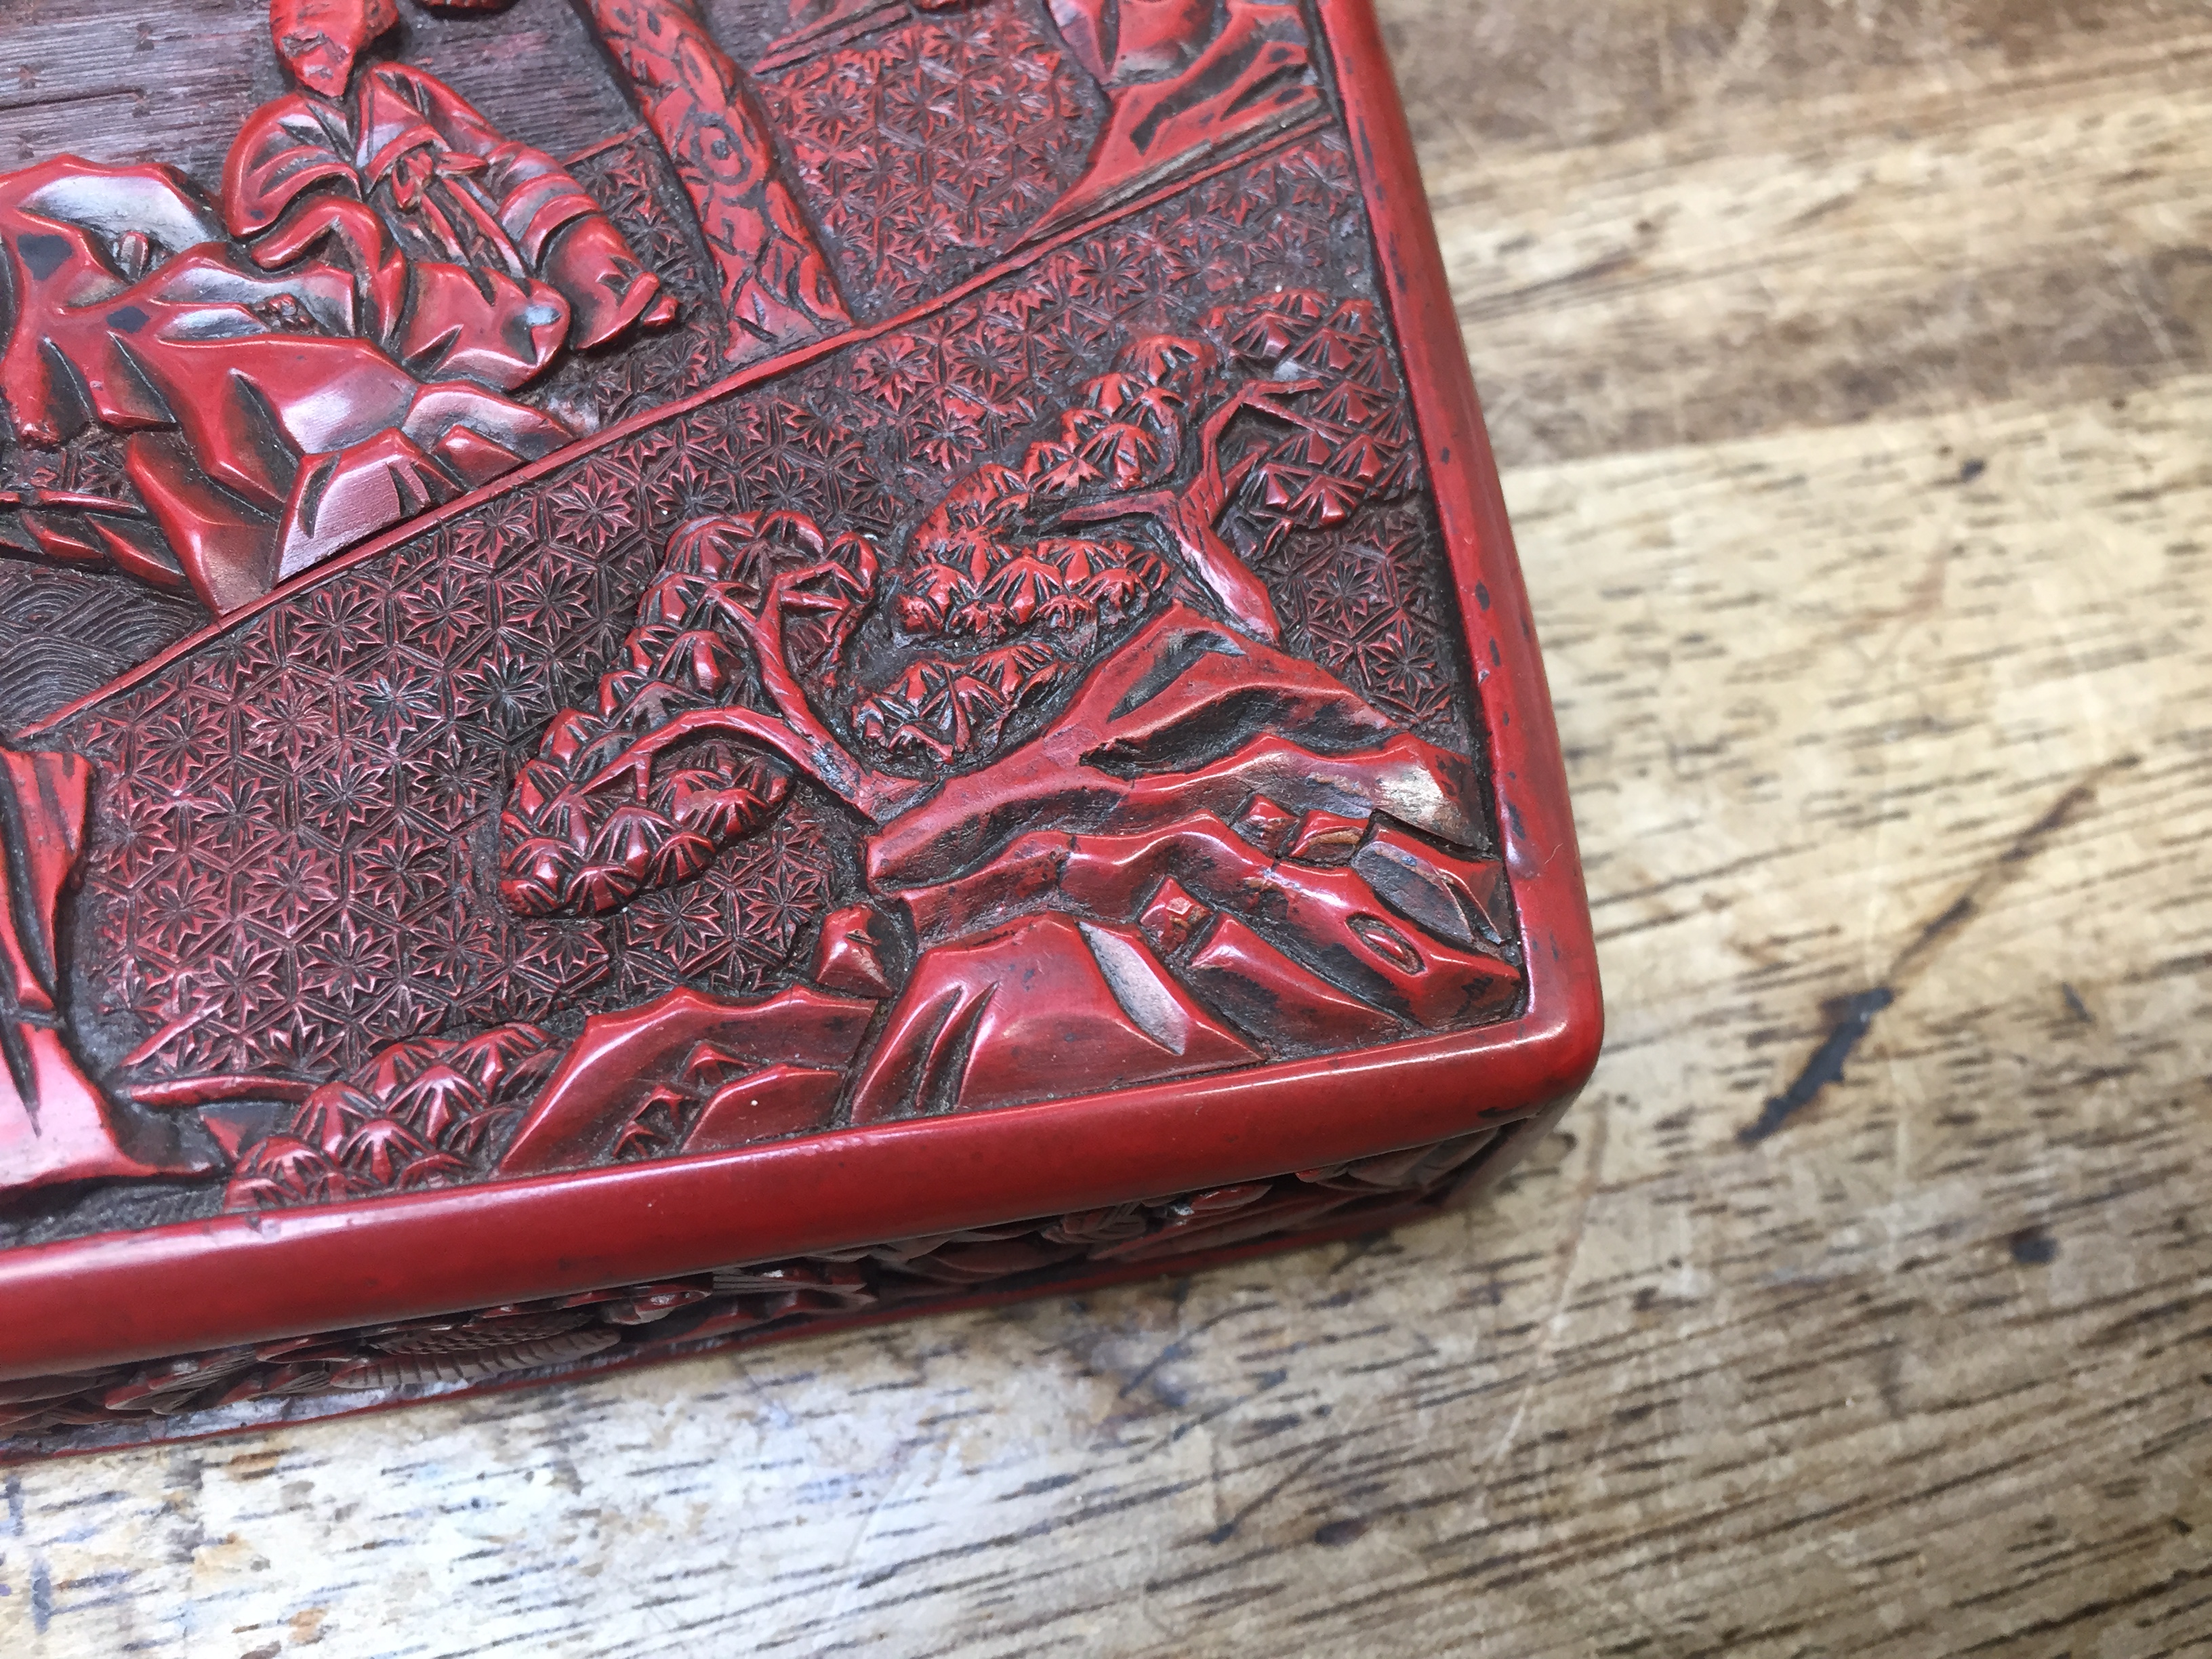 A CHINESE CINNABAR LACQUER TIERED BOX AND COVER 明 剔紅士大夫圖紋四層蓋盒 - Image 7 of 39